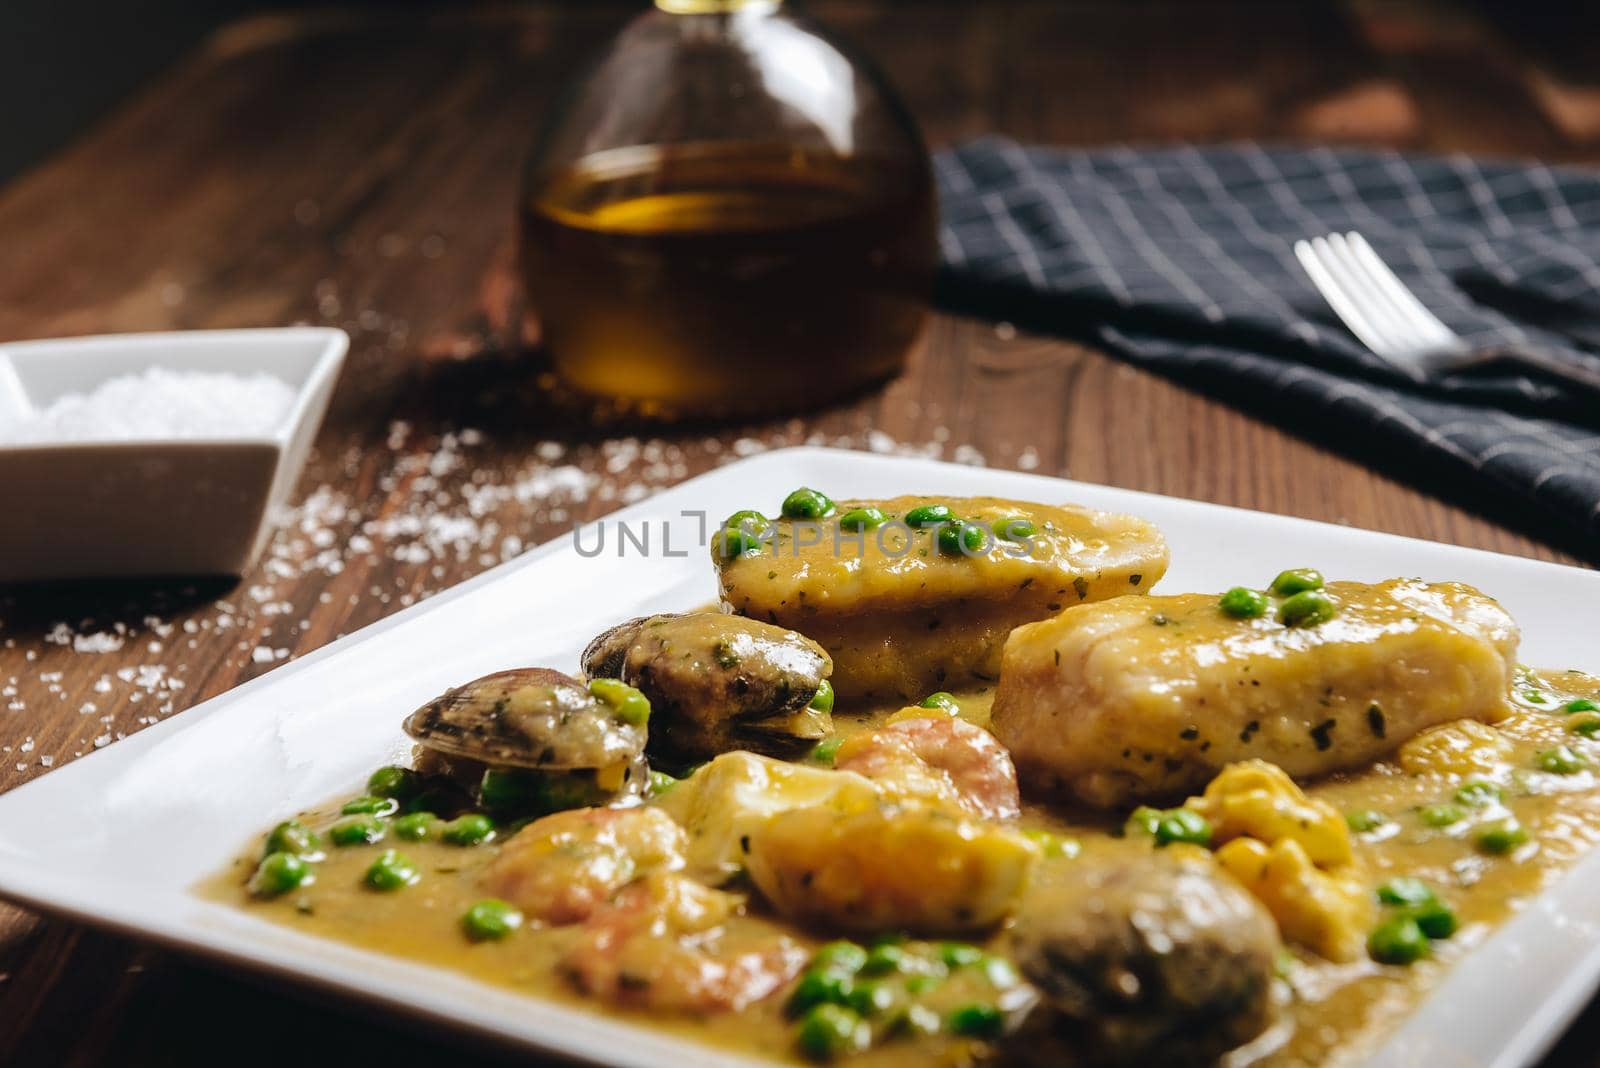 healthy traditional spanish hake dish with green seafood sauce with clams, prawns, green peas and egg, typical mediterranean cuisine with rustic dark food photo style